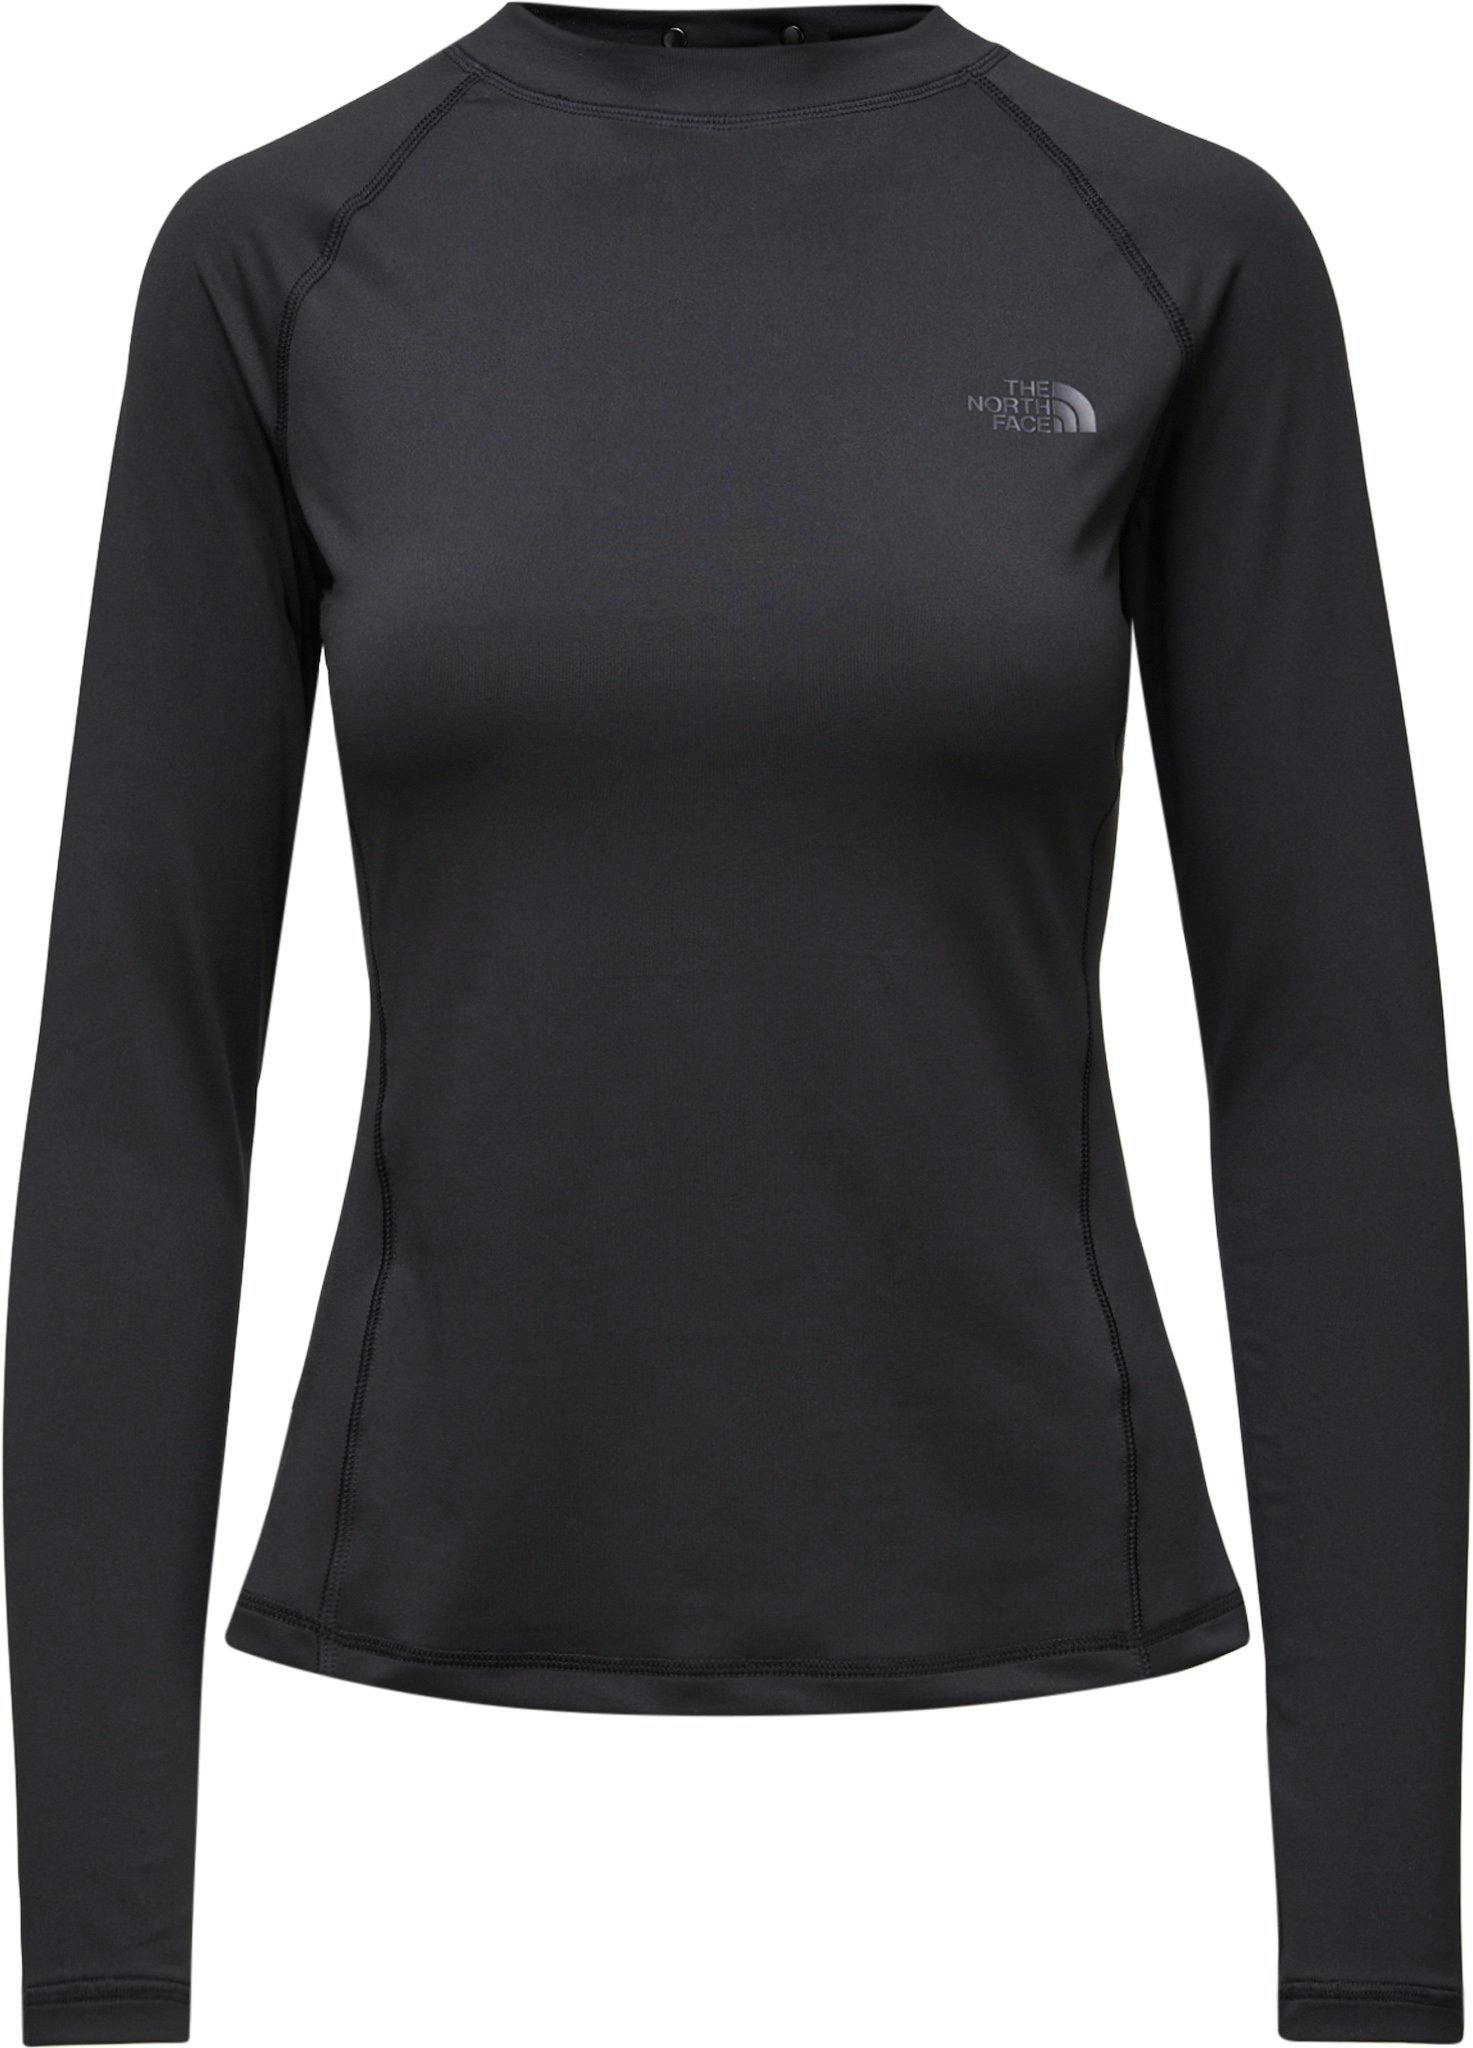 Product image for Class V Water Top - Women's